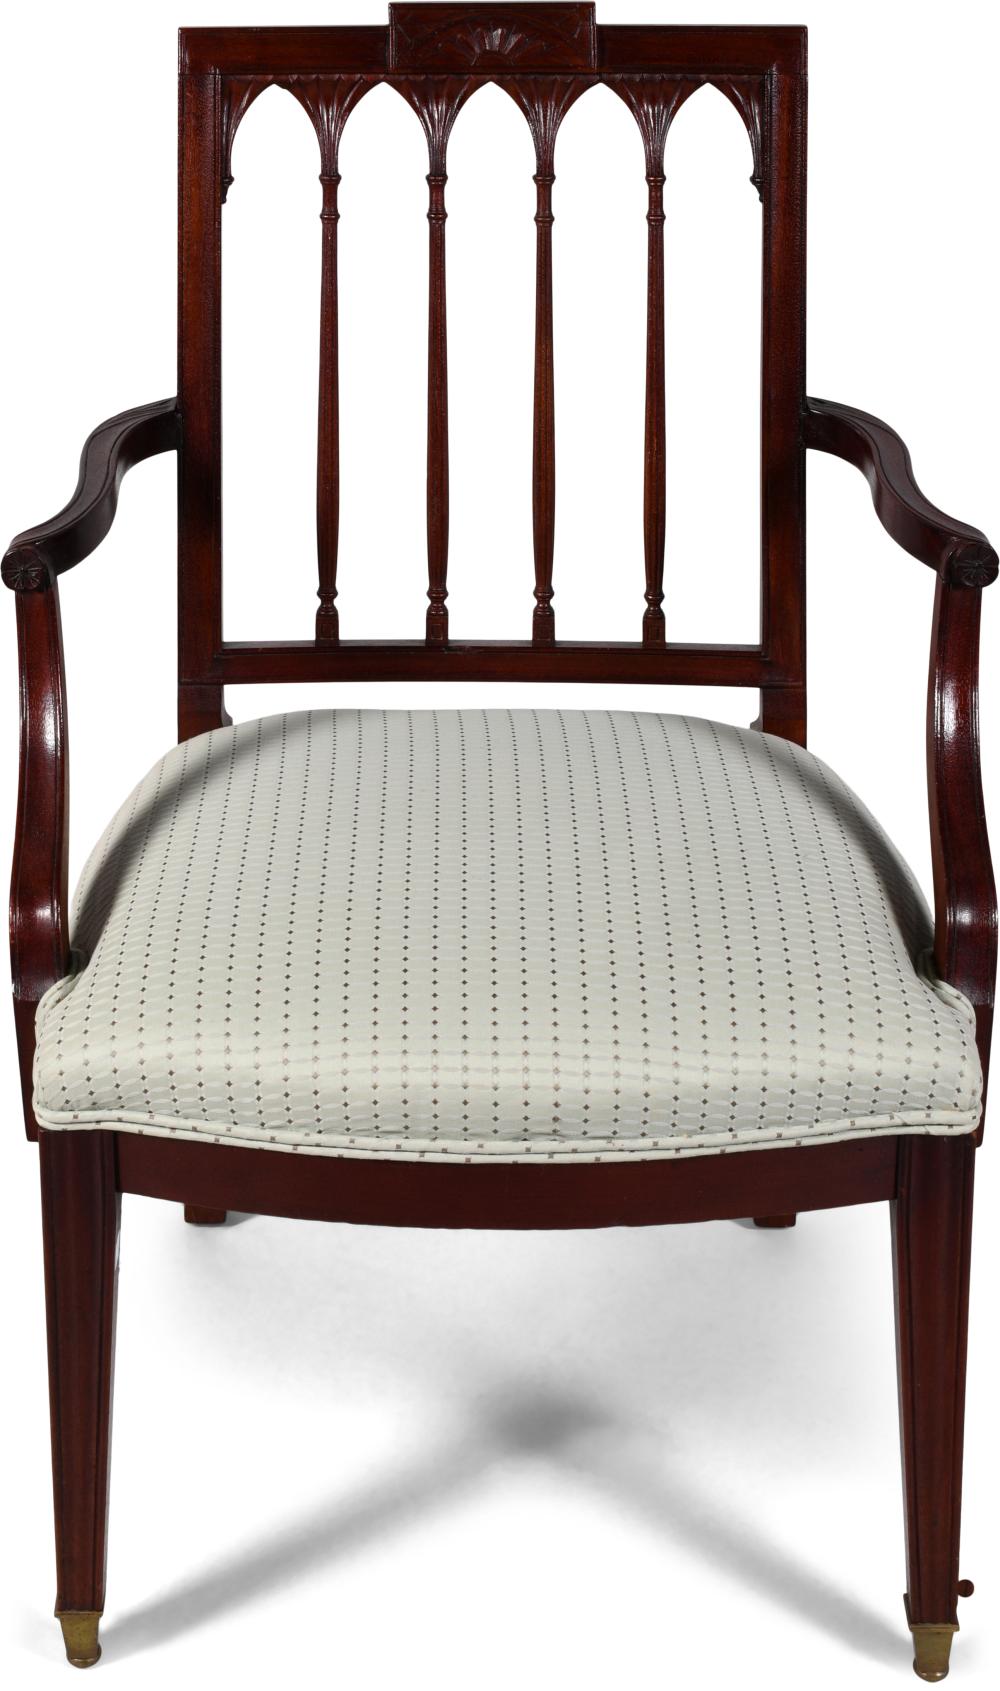 FEDERAL STYLE MAHOGANY OPEN ARMCHAIR 33db89